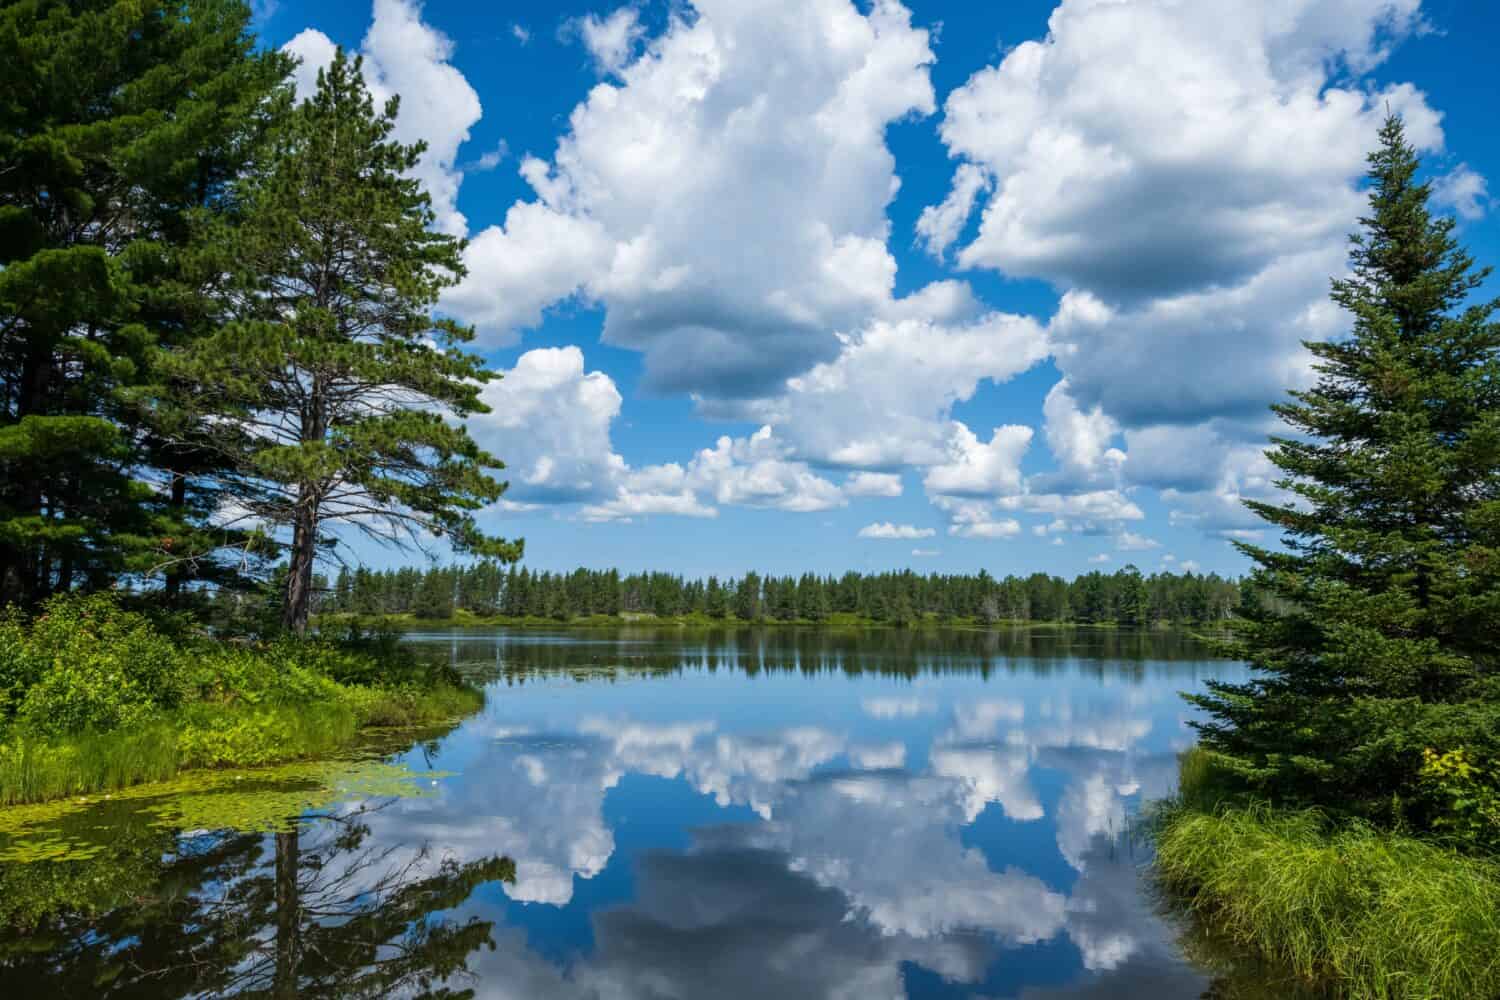 A view from Seney National Wildlife Refuge in Michigan's Upper Peninsula